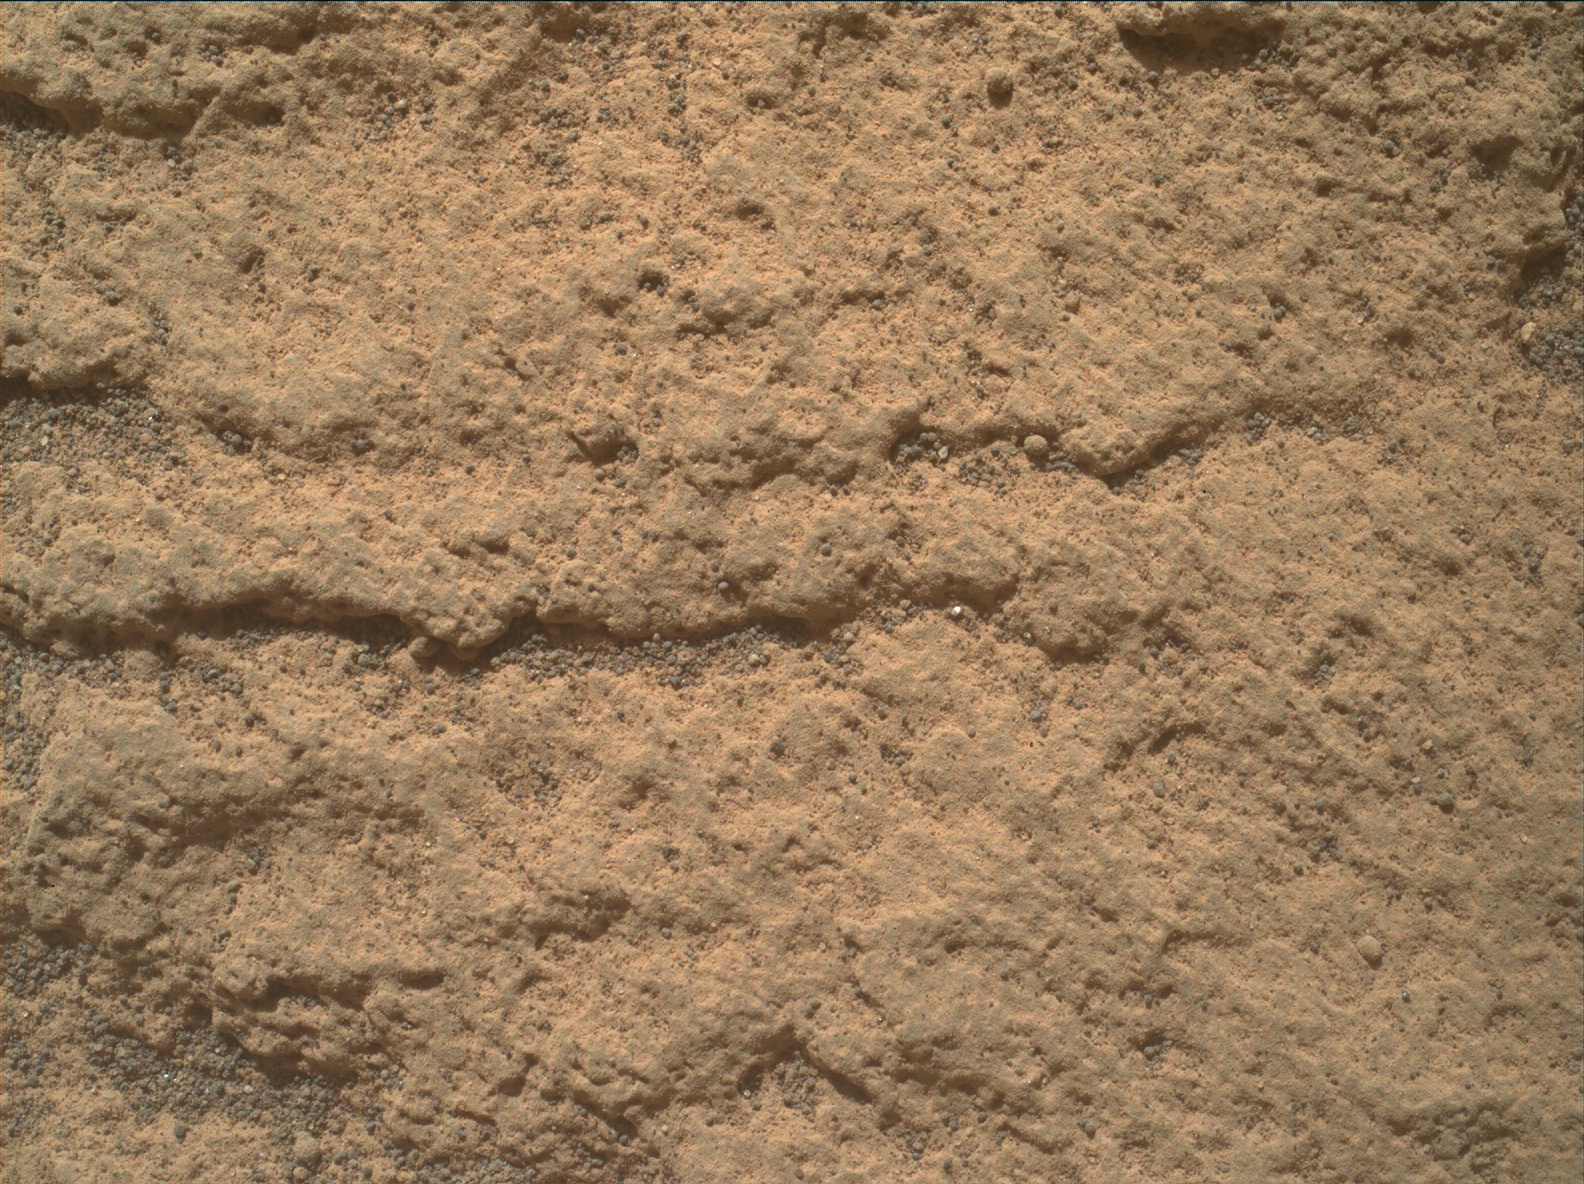 Nasa's Mars rover Curiosity acquired this image using its Mars Hand Lens Imager (MAHLI) on Sol 3420